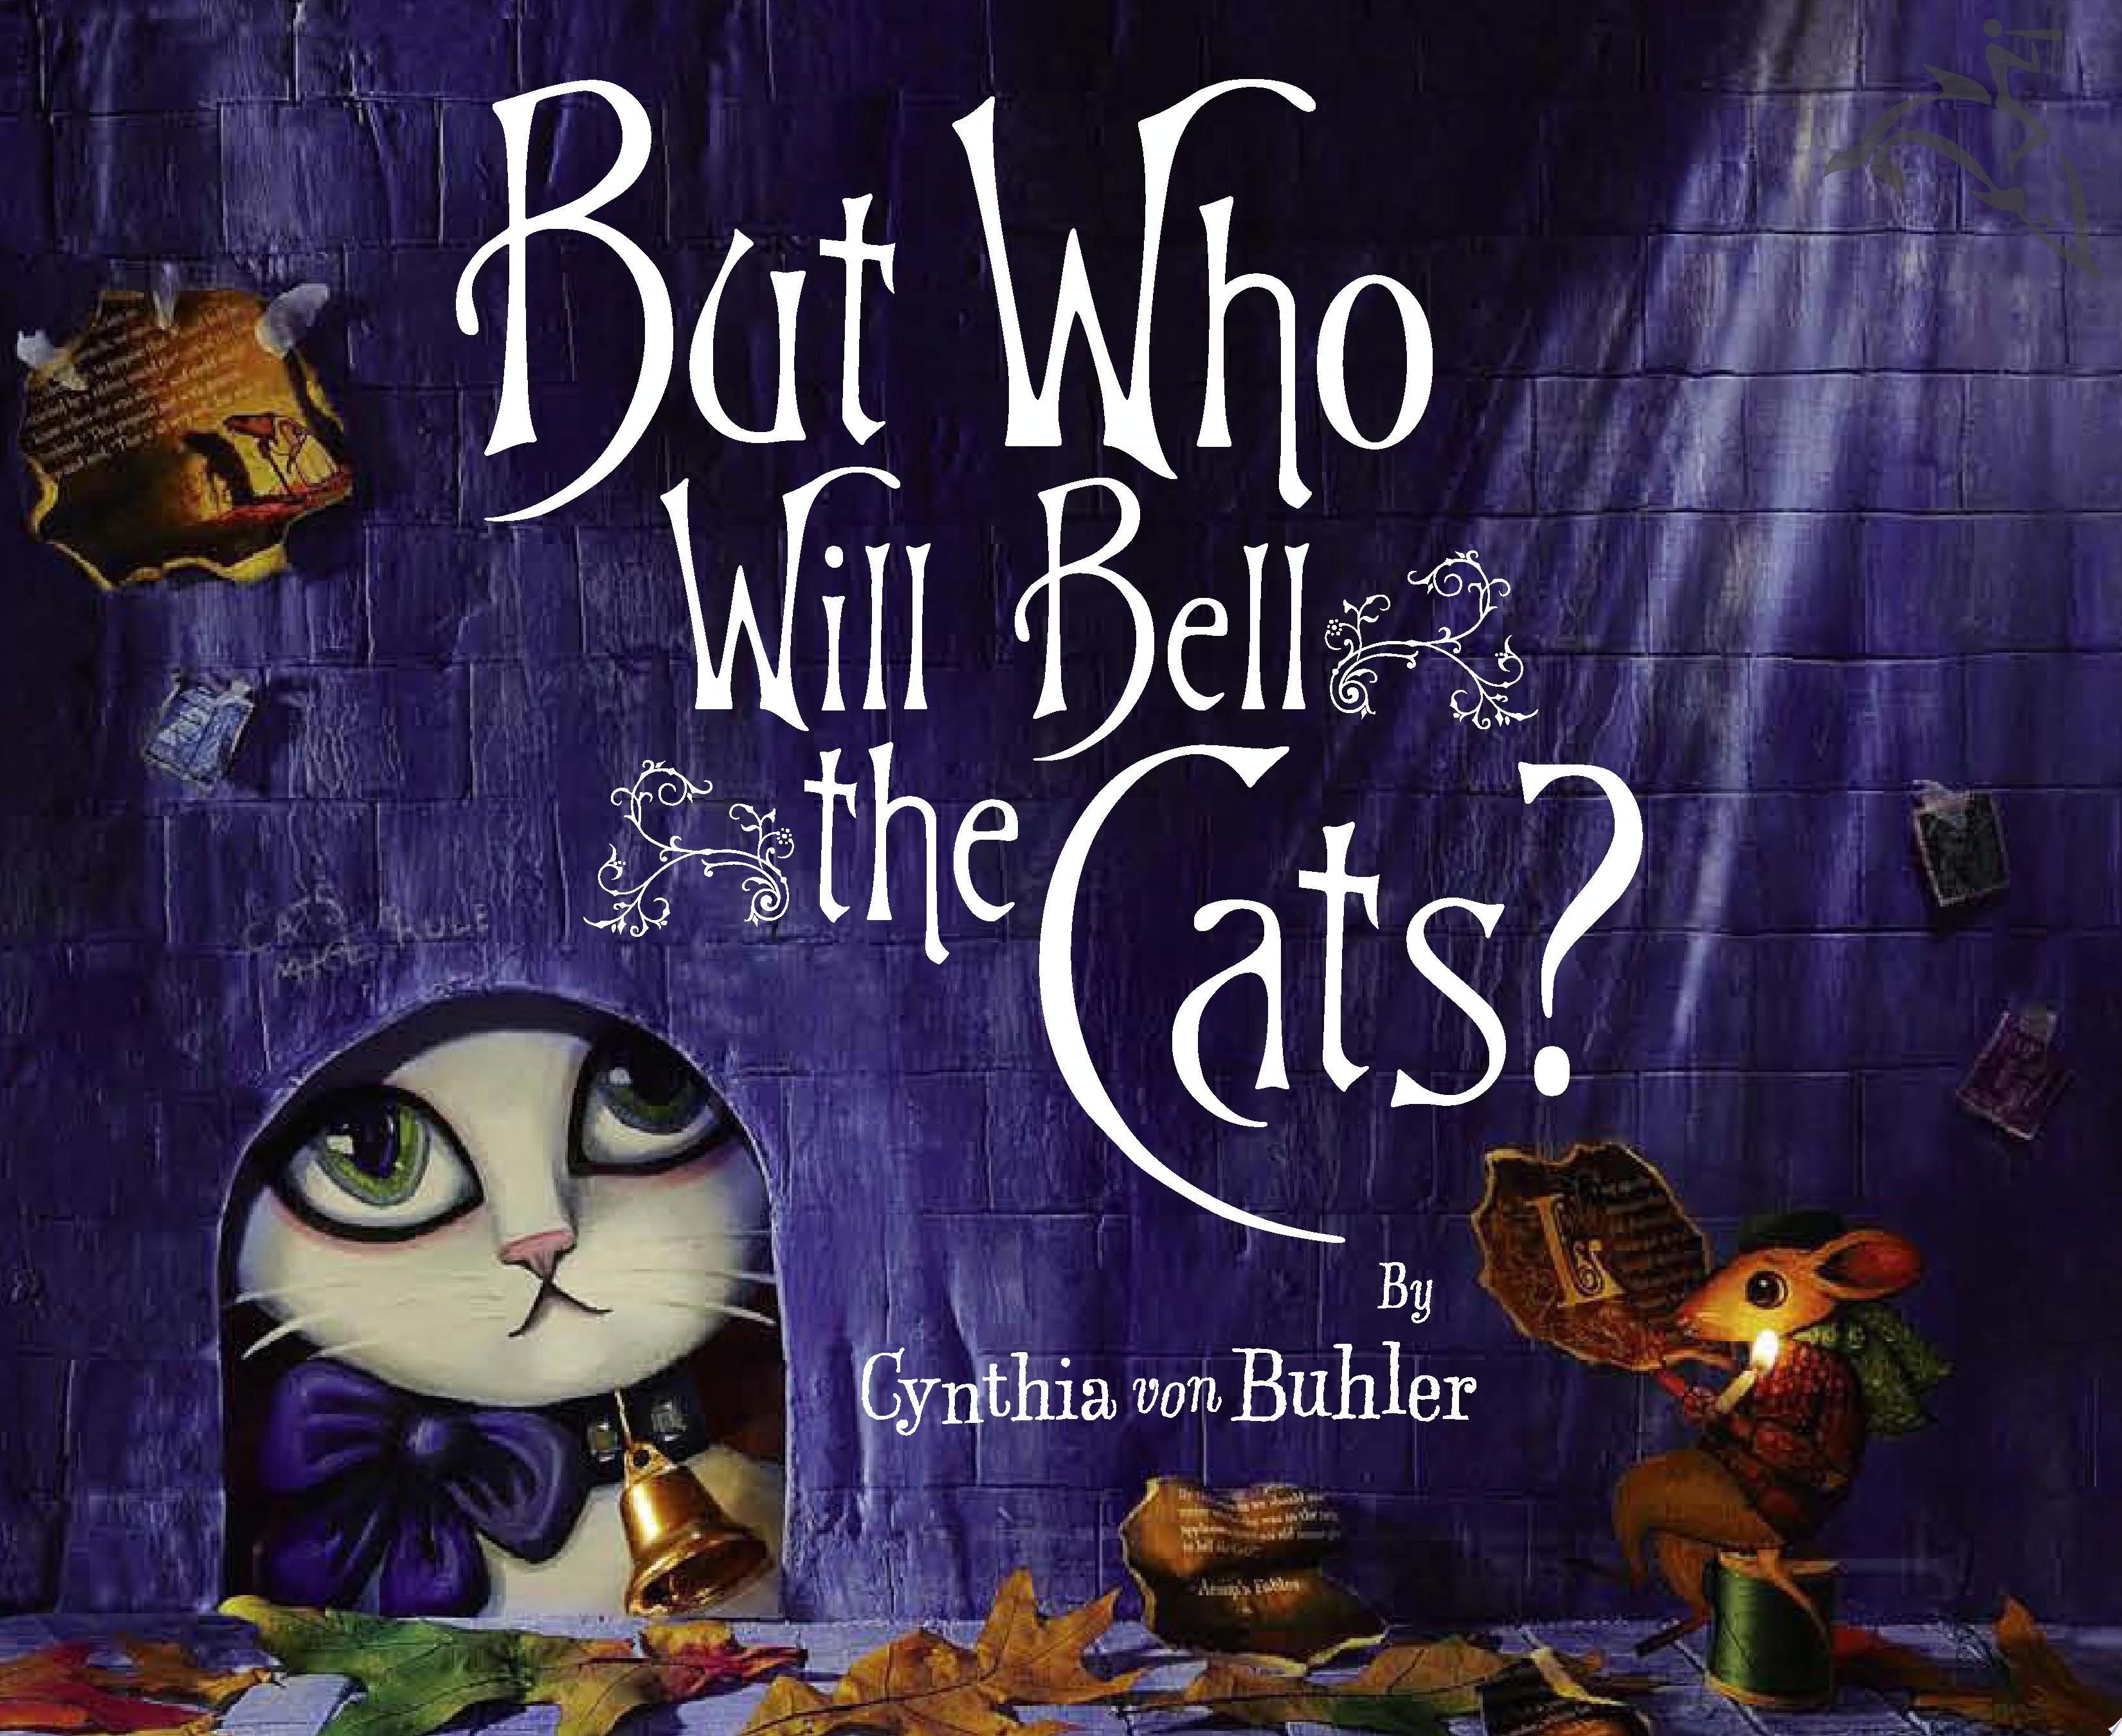 Image for "But Who Will Bell the Cats?"